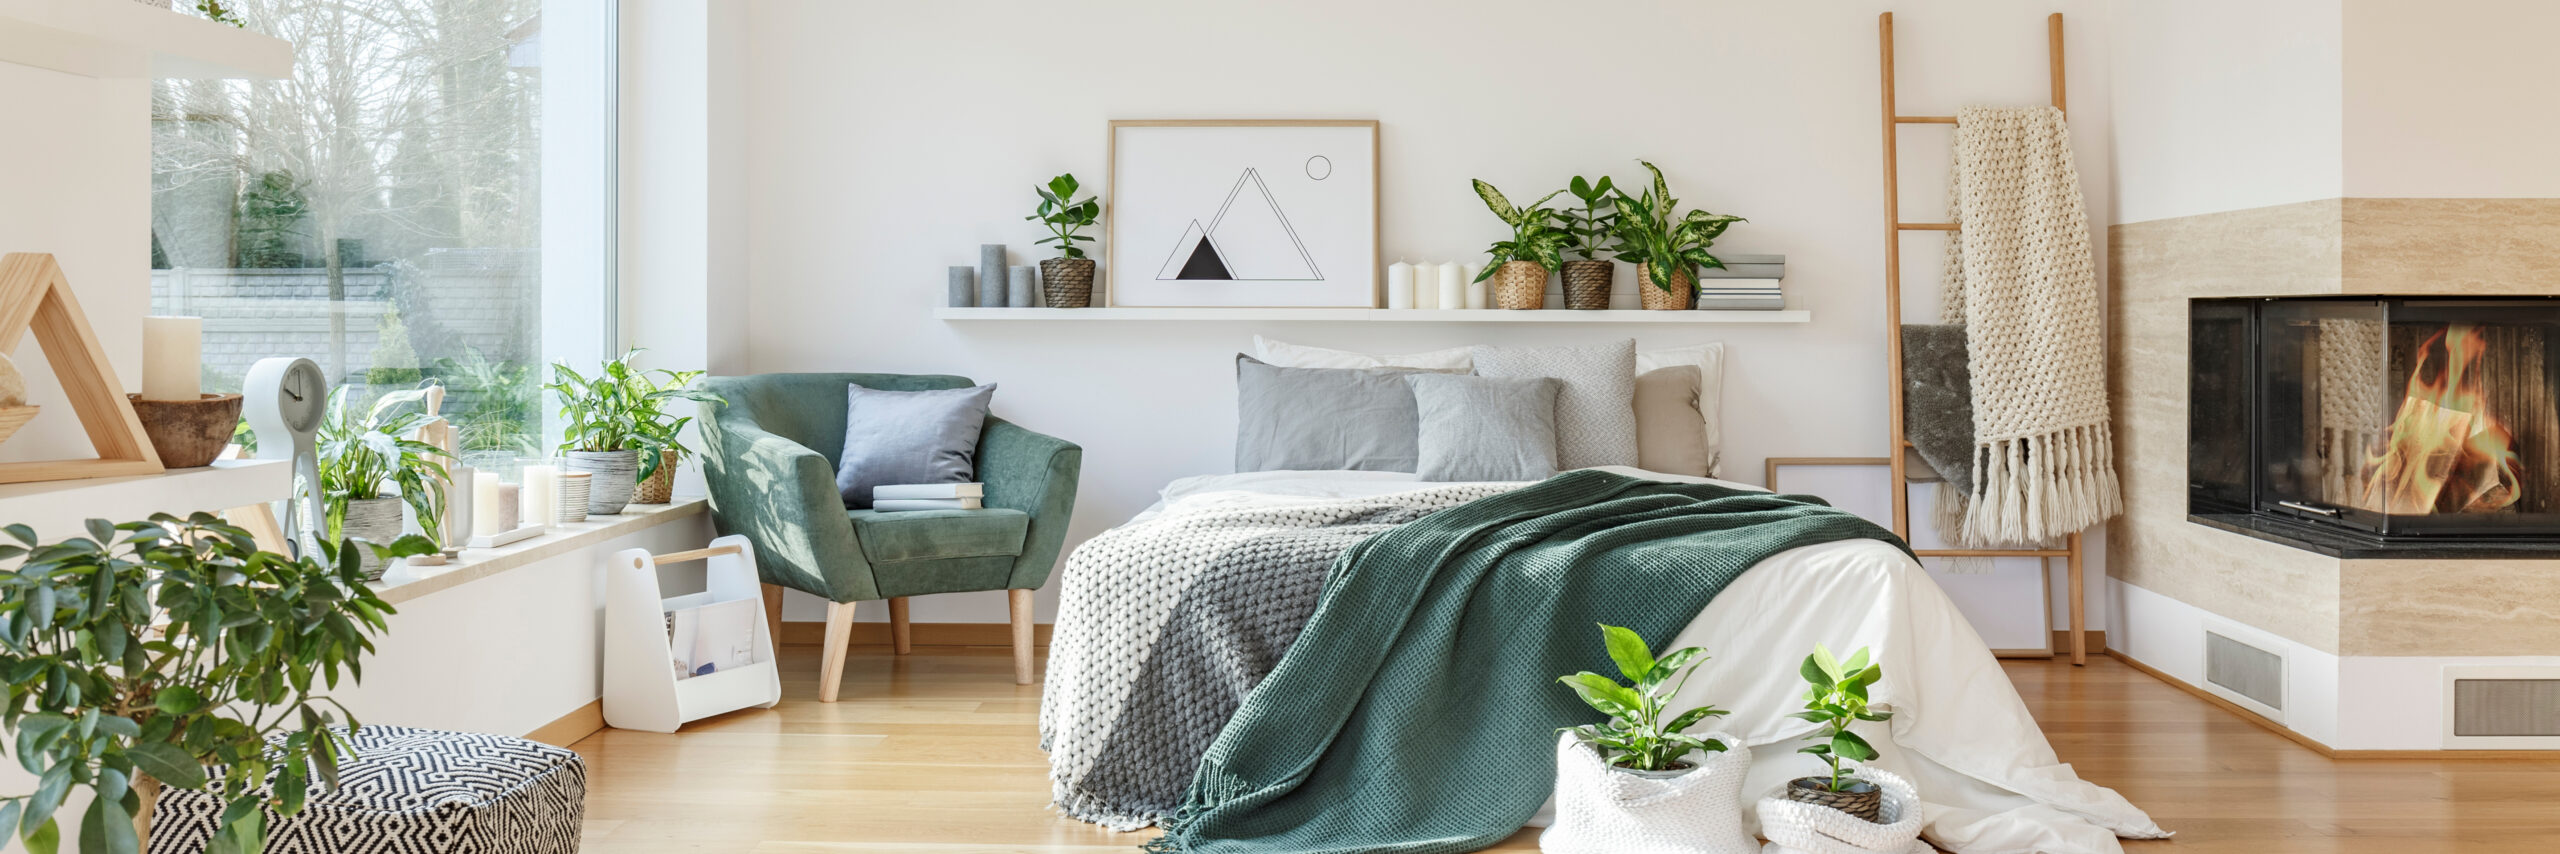 Transform Your Bedroom Into A Relaxing Space With These 5 Tips